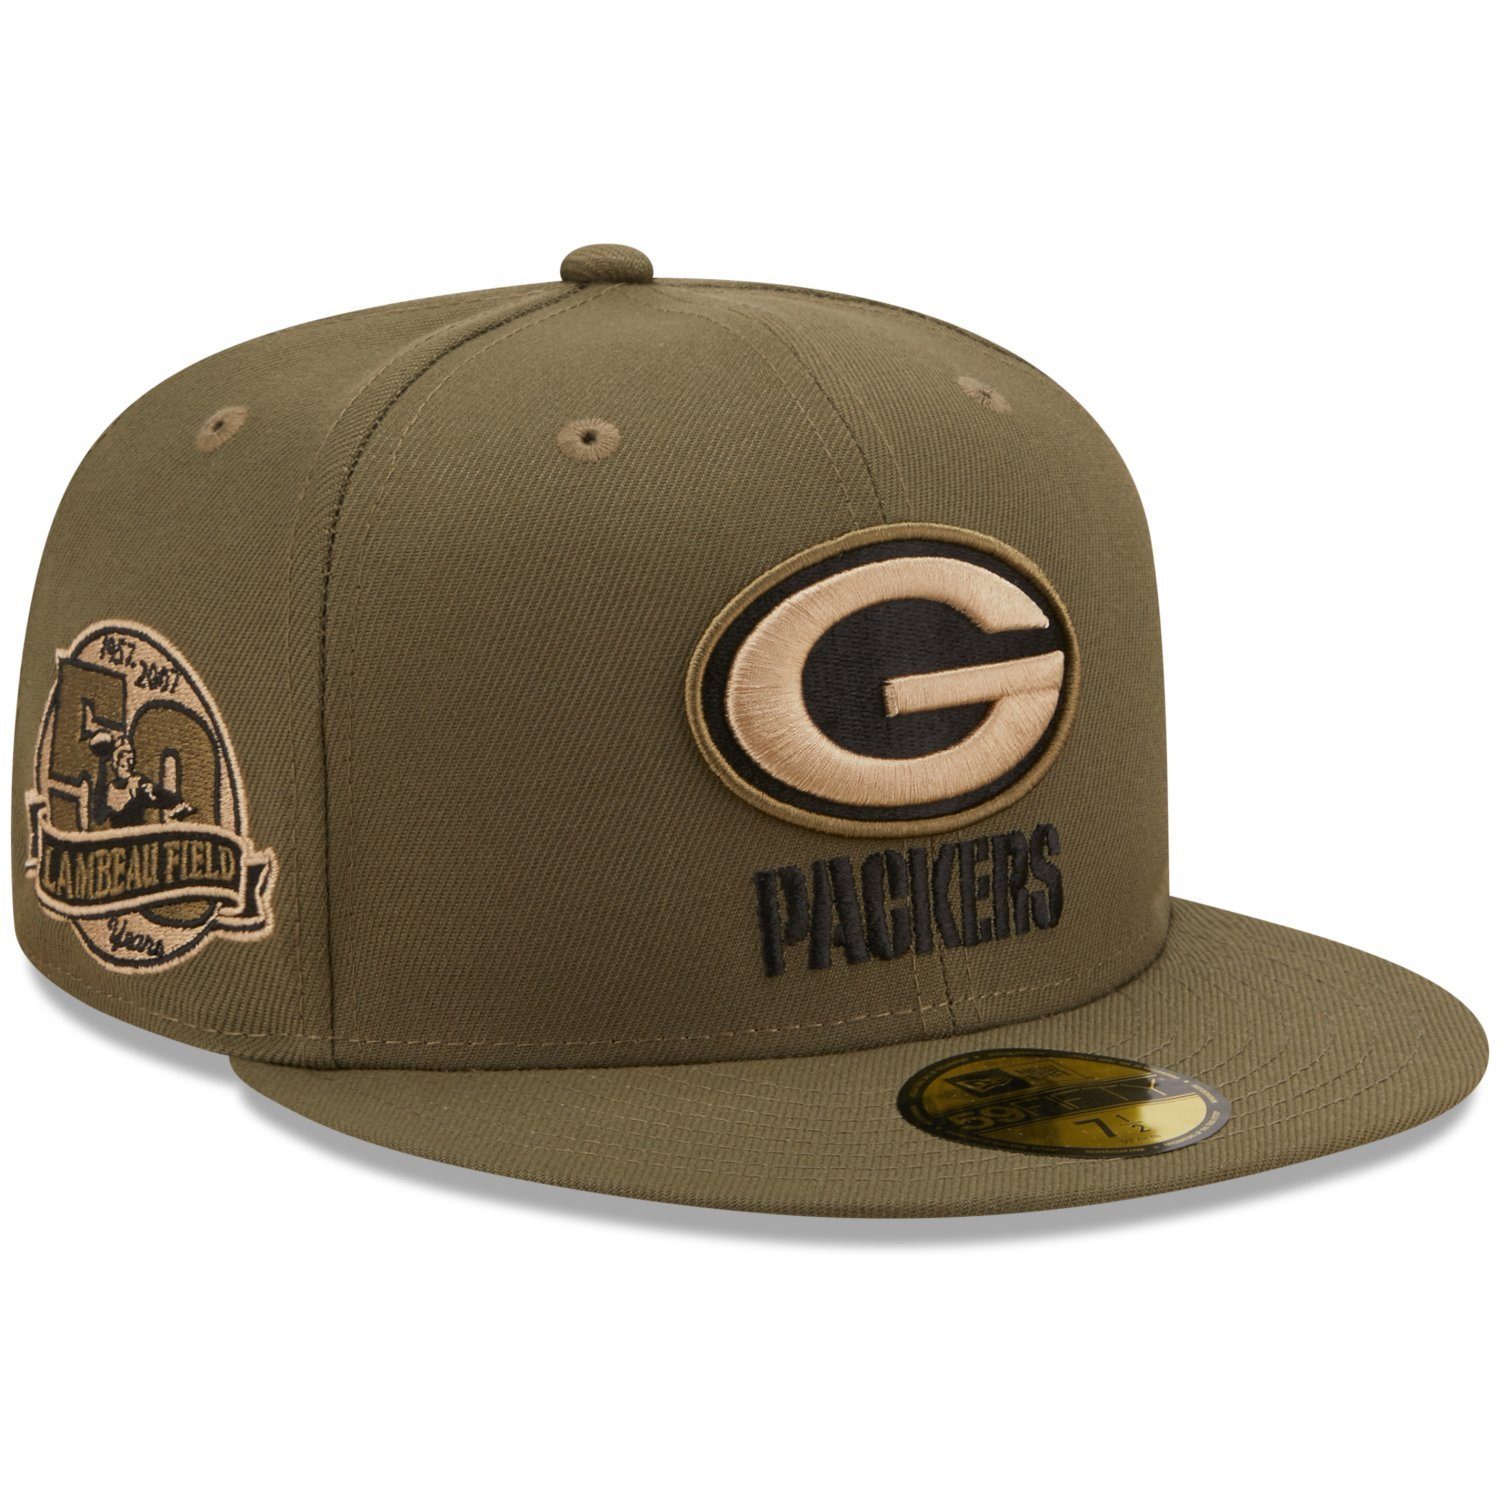 New Era Fitted Cap 59Fifty NFL Throwback Superbowl ProBowl Green Bay Packers